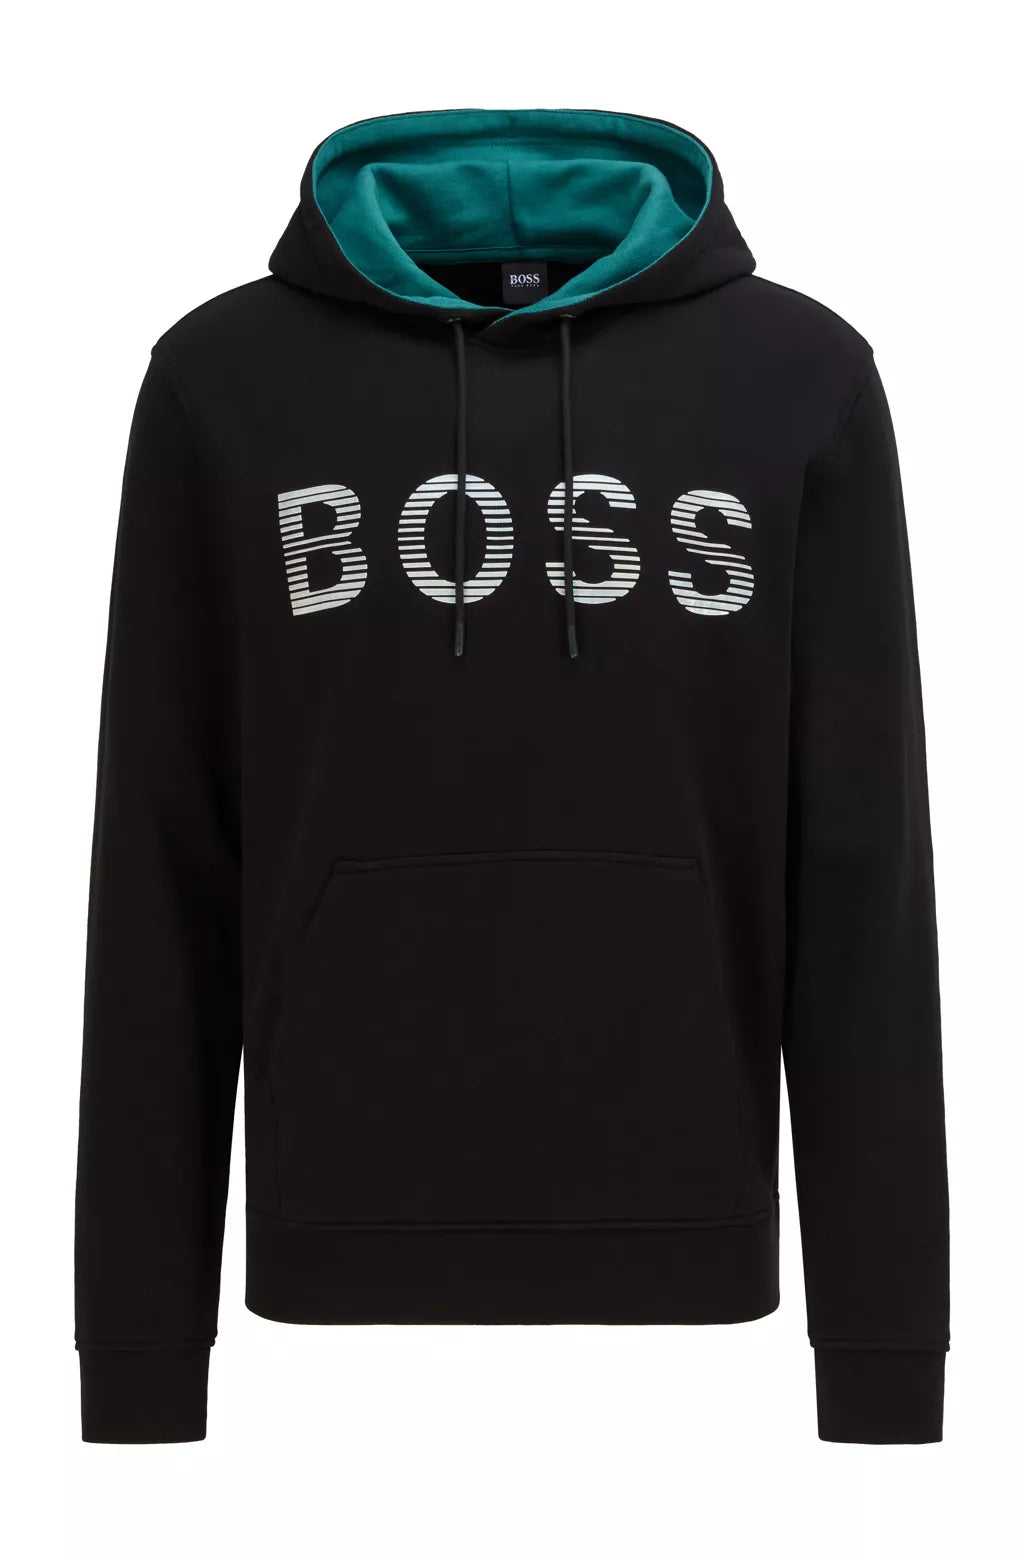 Boss HOODED SWEATSHIRT IN FRENCH TERRY COTTON WITH METALLIC LOGO   Color Black Size XL